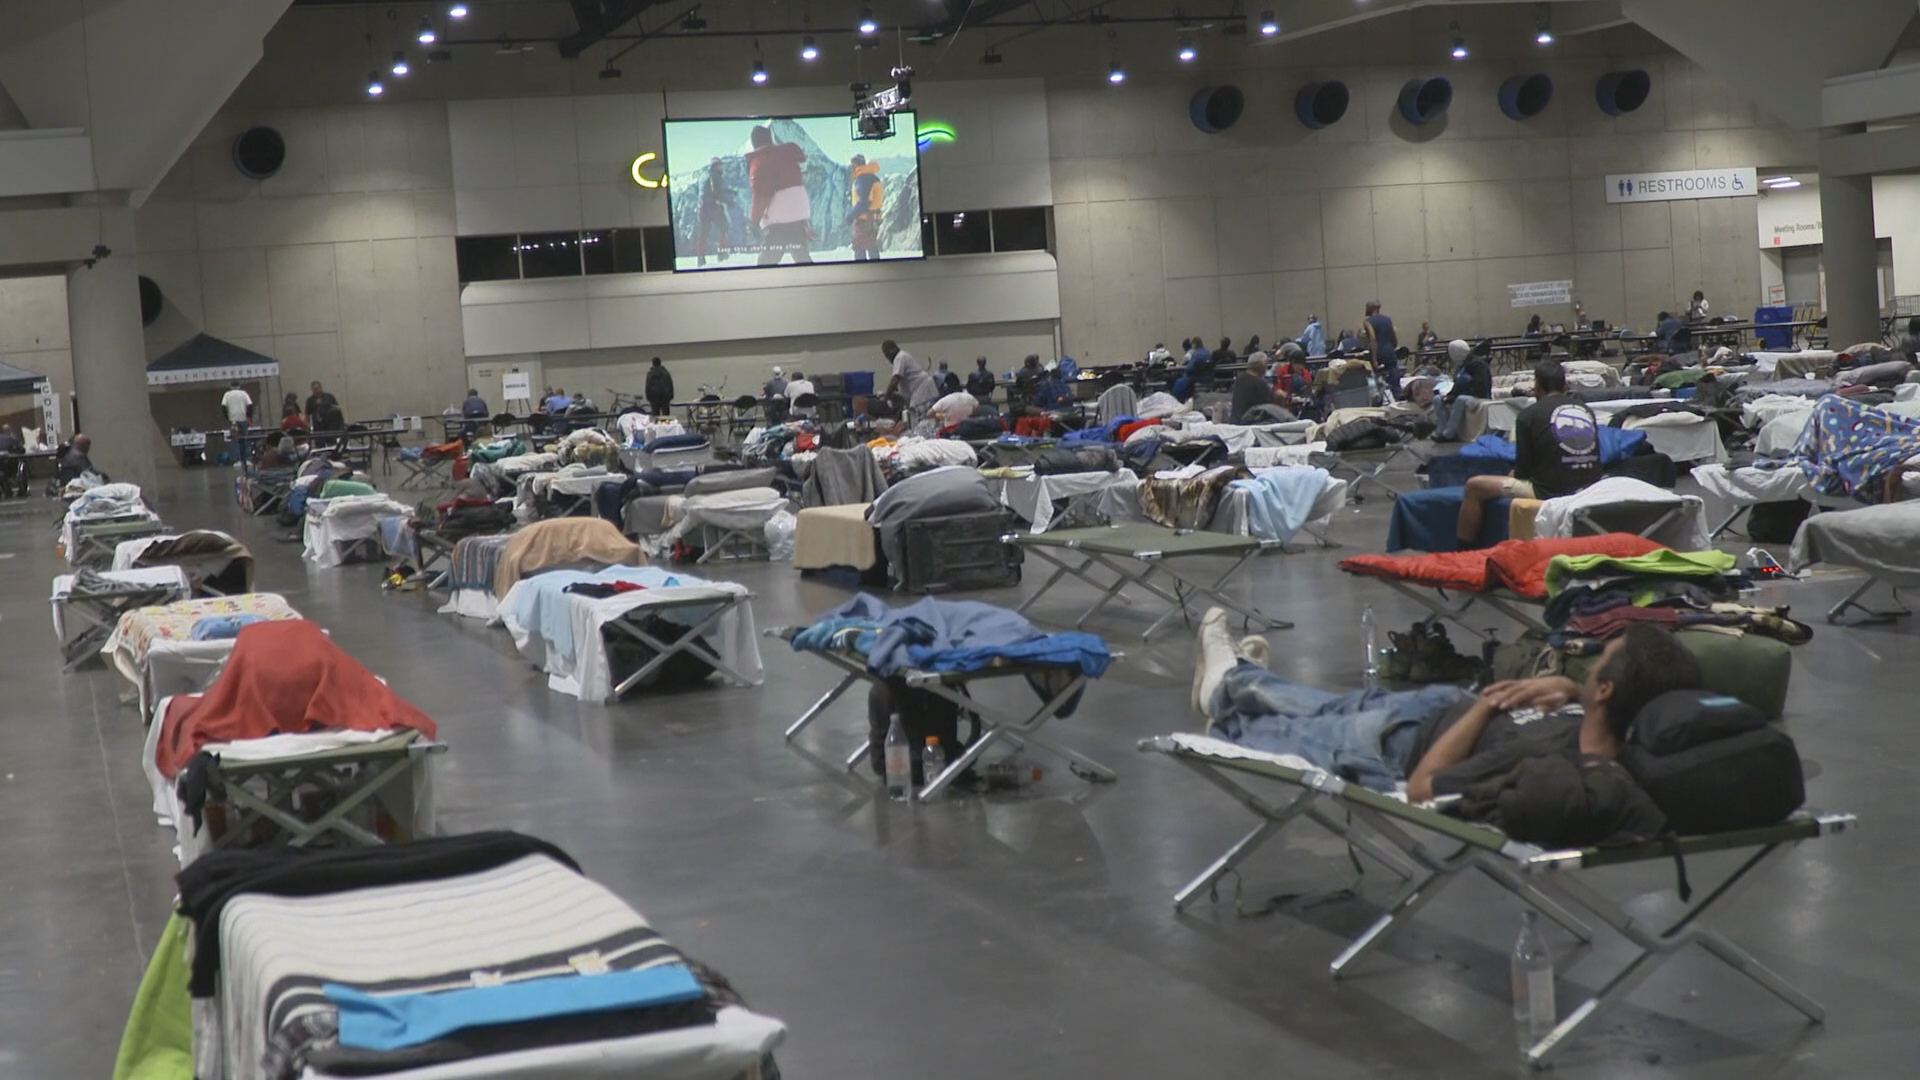 Authorities say that housing 900 people at the Convention Center is costing taxpayers roughly $5.7 million dollars a month, that’s about $211 each person a day.